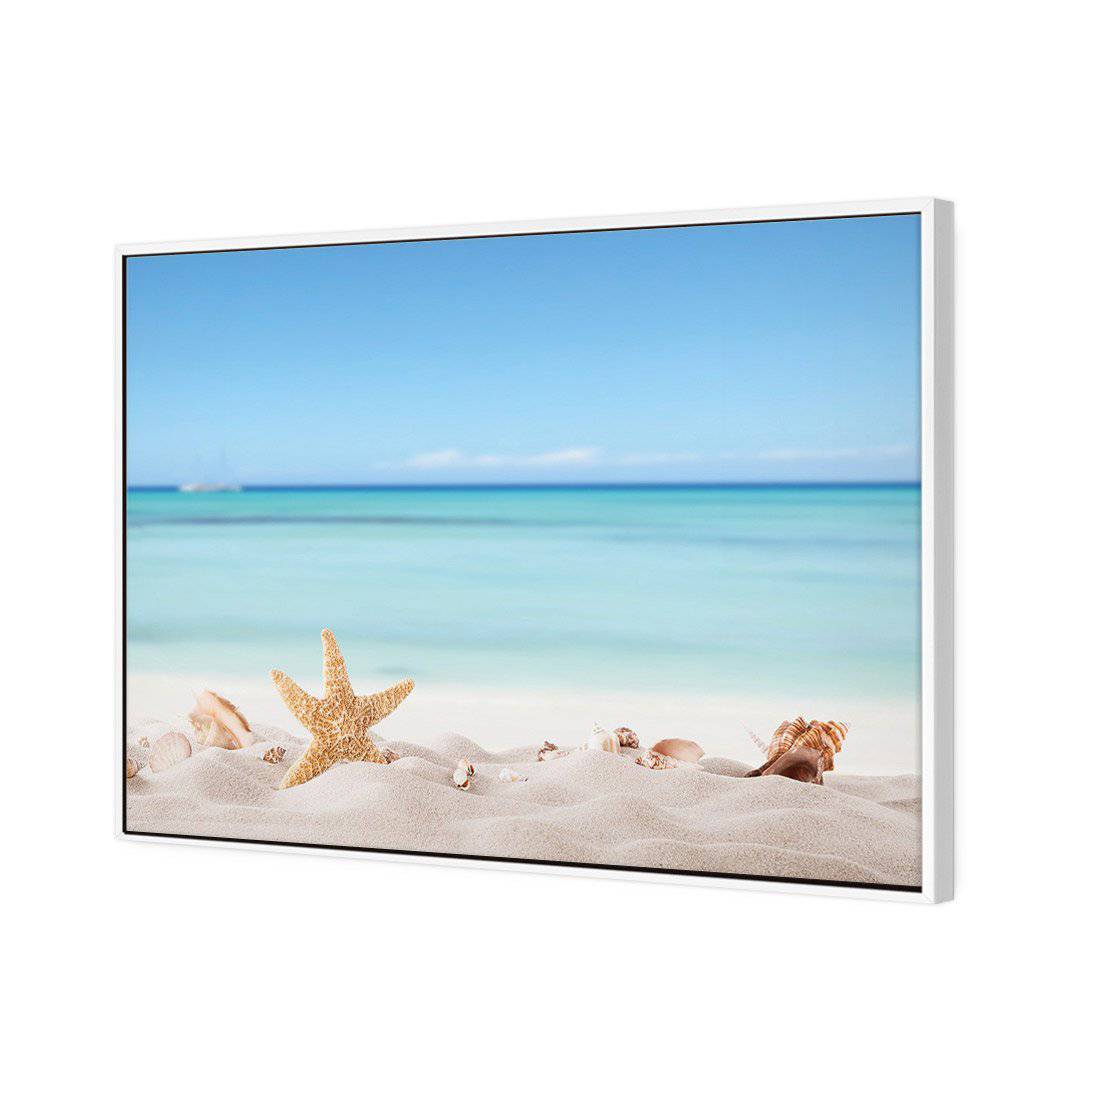 Starfish and Friends Canvas Art-Canvas-Wall Art Designs-45x30cm-Canvas - White Frame-Wall Art Designs